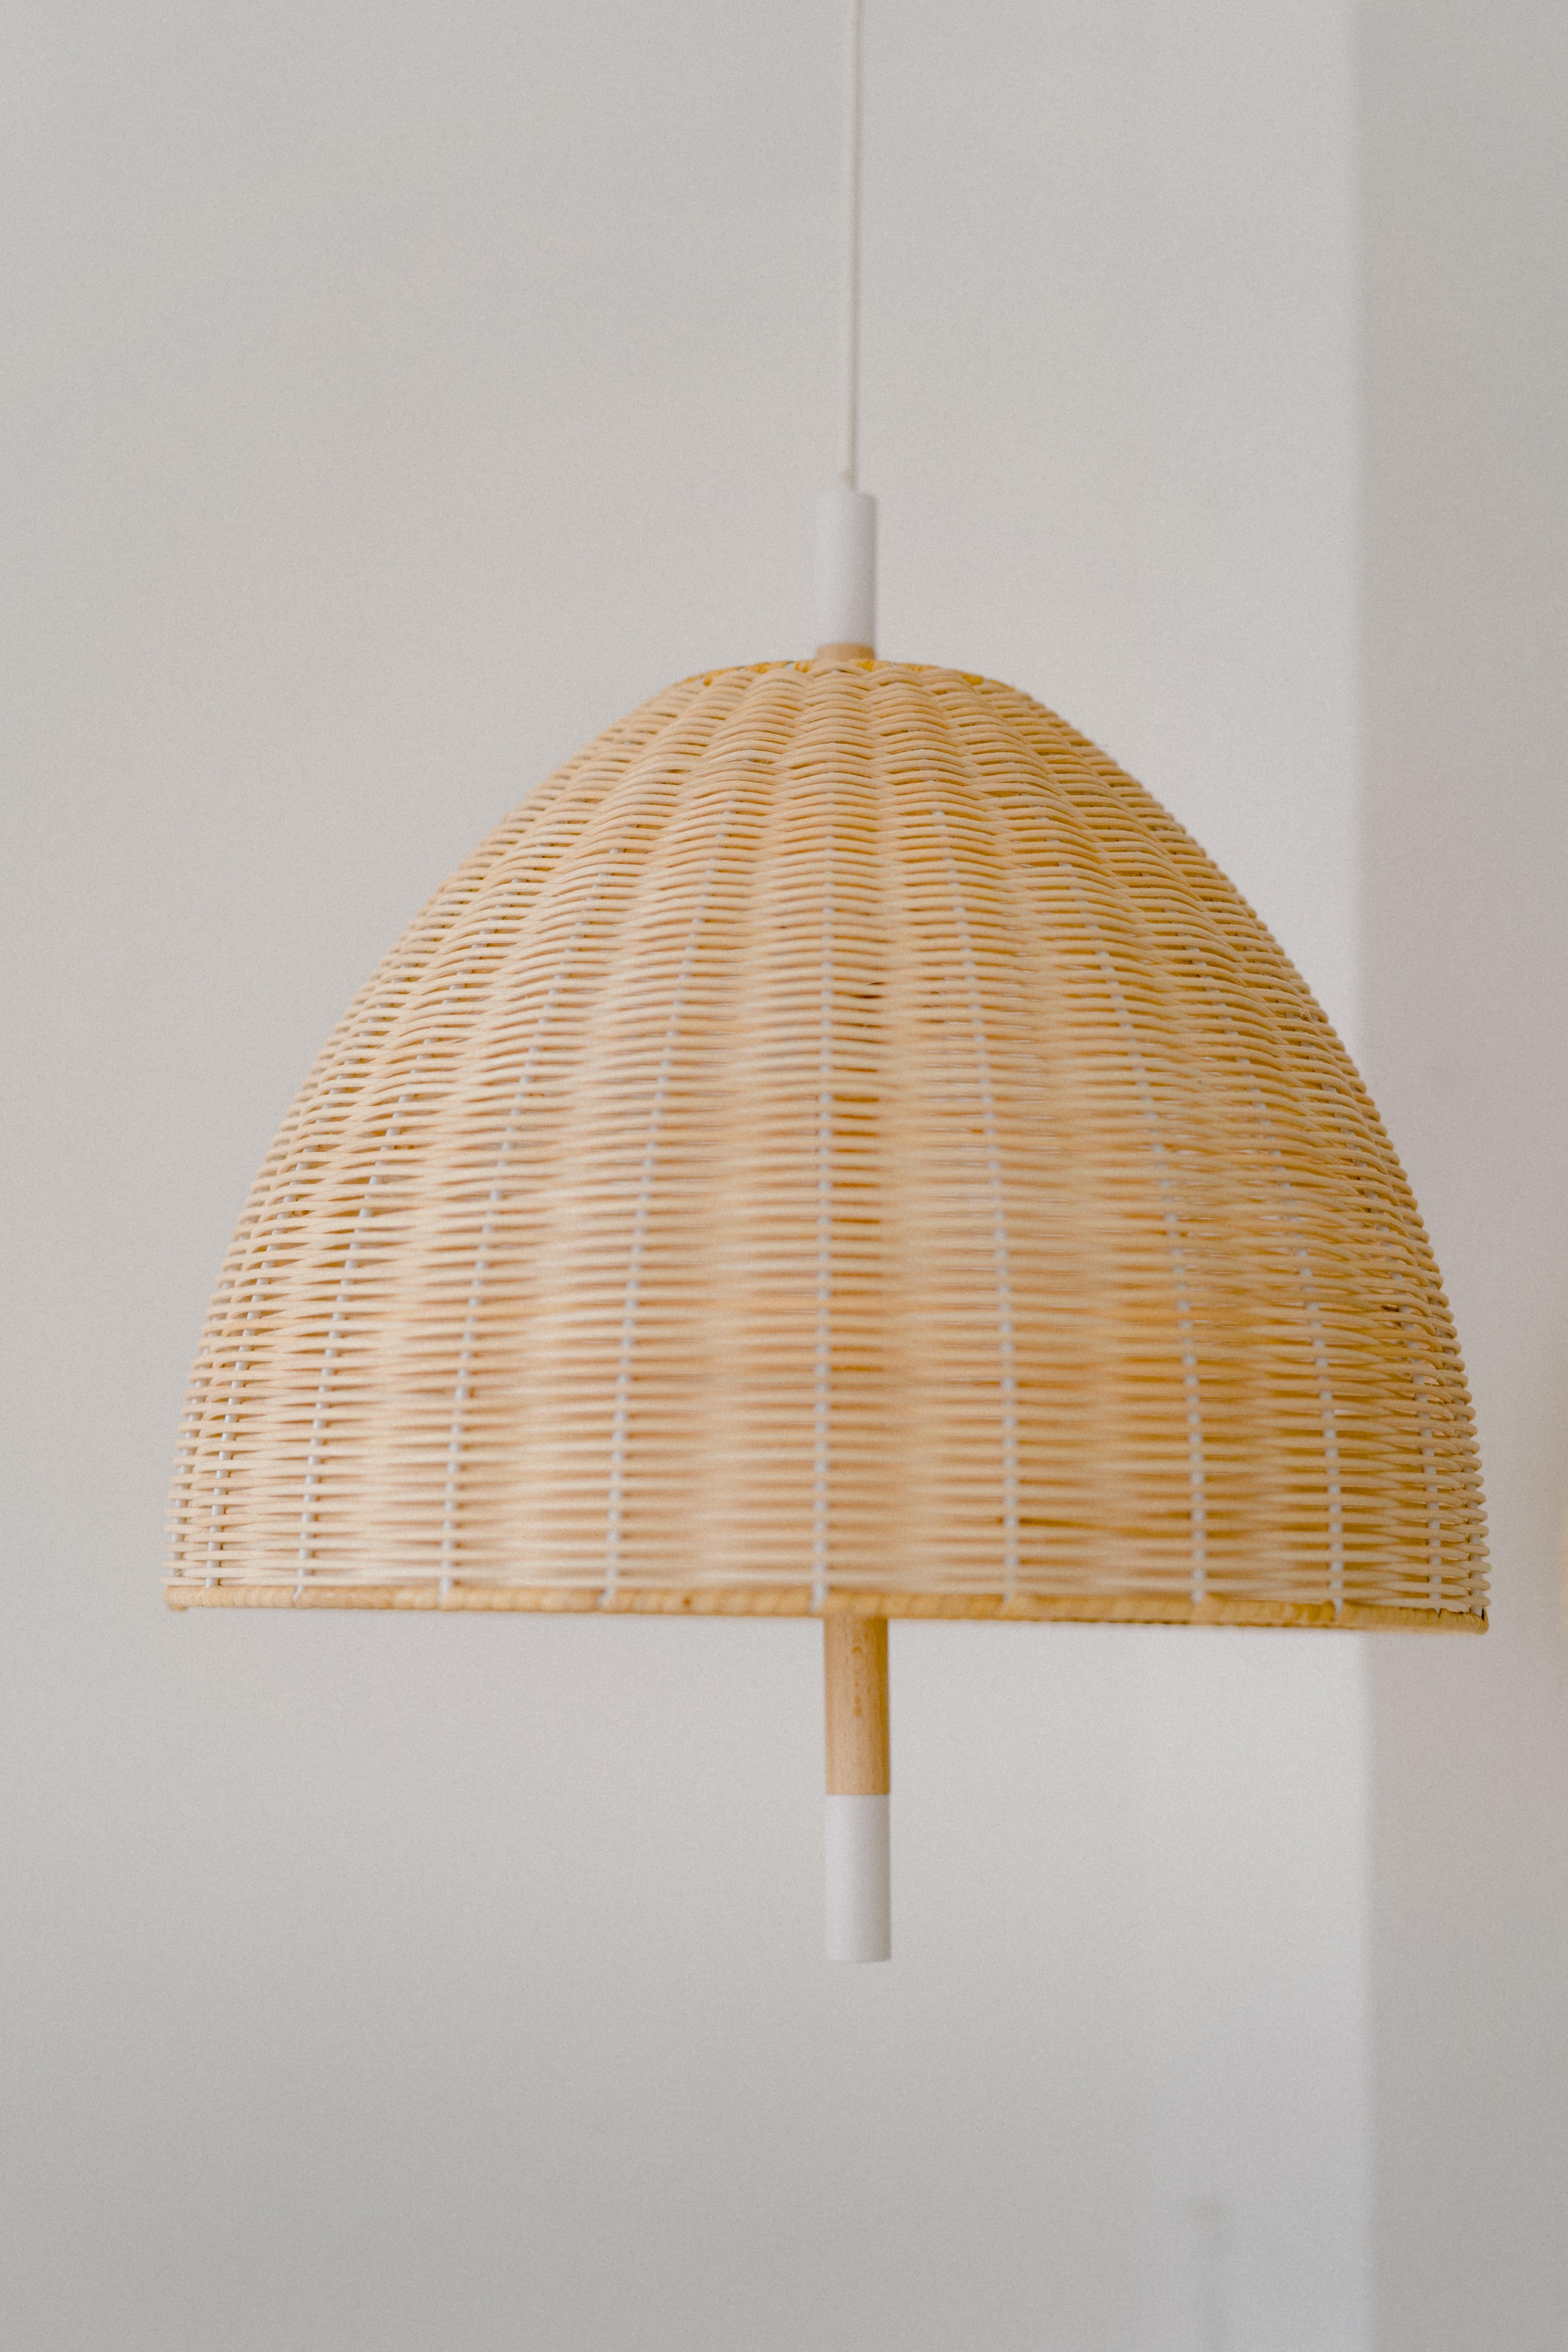 AMÀ - Pendant suspendend lamp

Amà , comes from the Catalan '' a mà '', which means '' handmade '', and it is how this contemporary lamp is made. With hand-turned beech wood, solid brass details, and hand-woven lampshade in natural